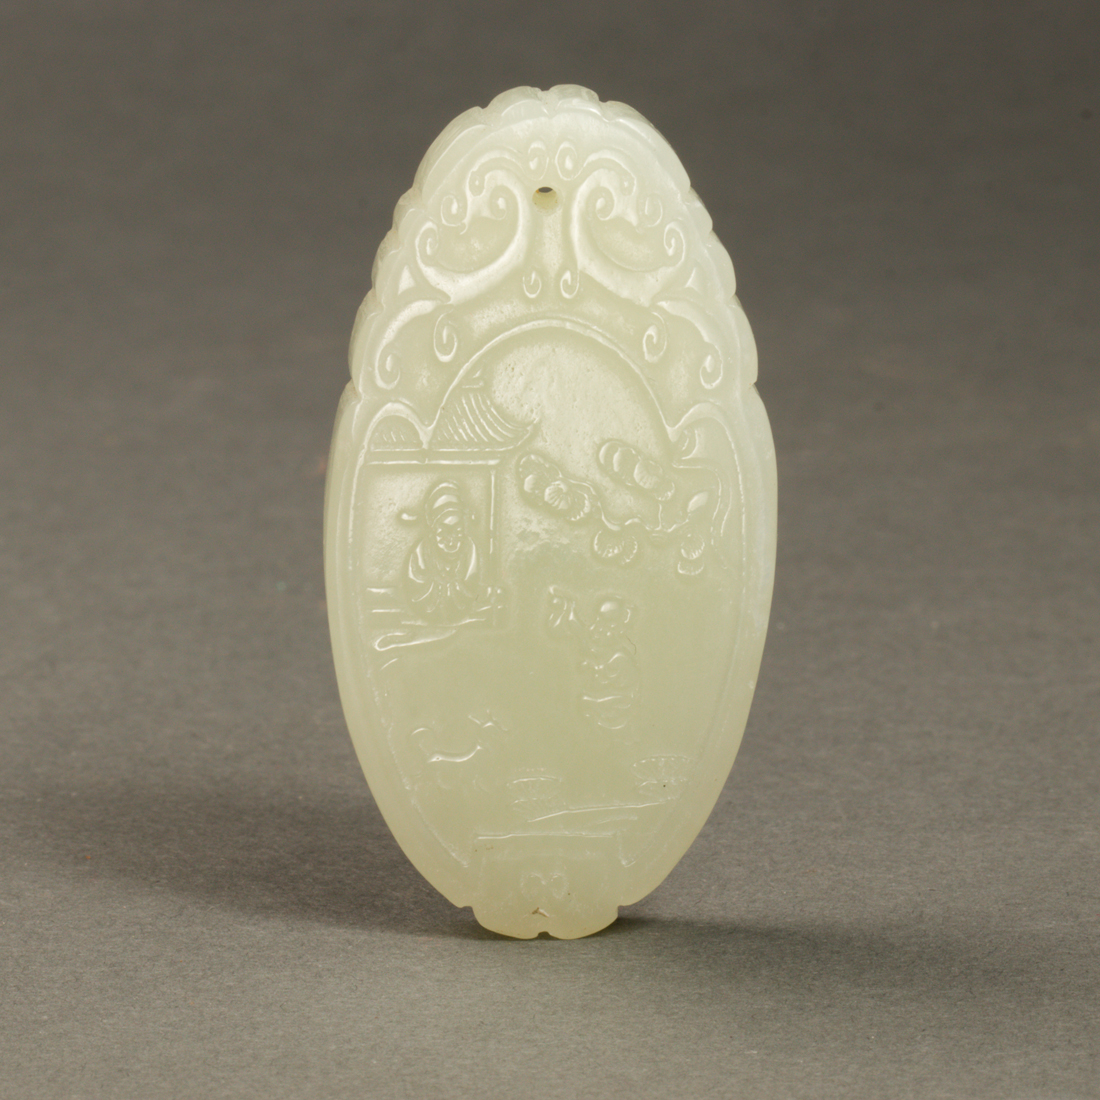 CHINESE WHITE JADE OVAL PENDANT 2d2d92